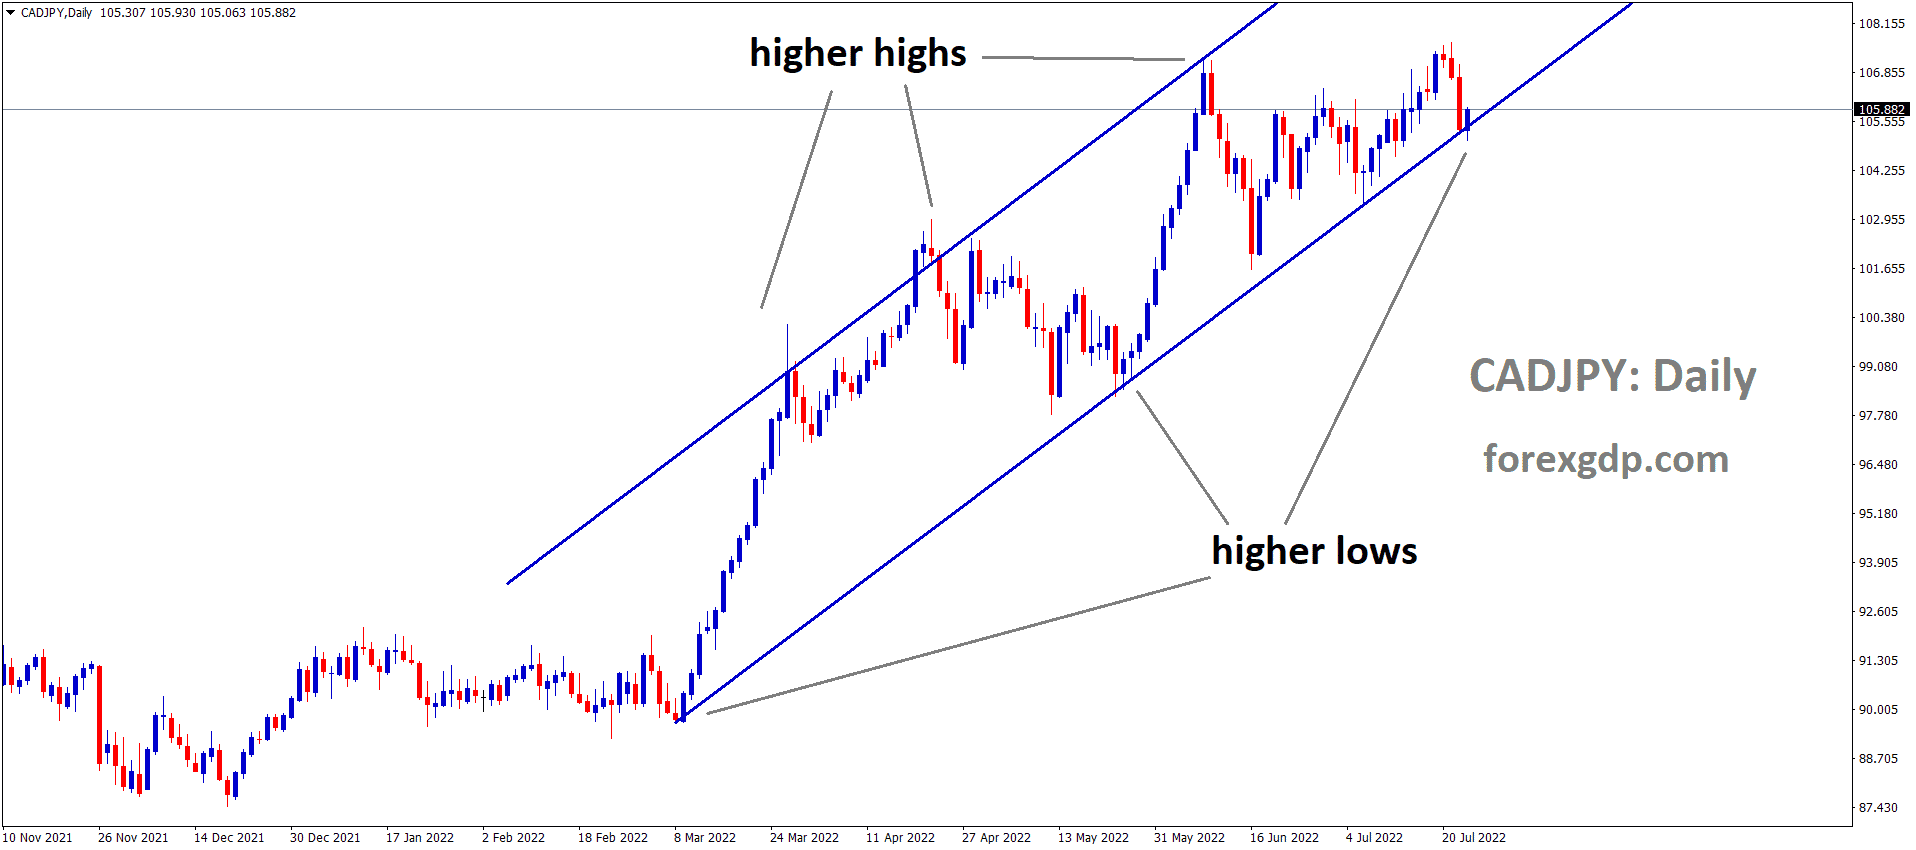 CADJPY is moving in an Ascending channel and the Market has rebounded from the higher low area of the channel